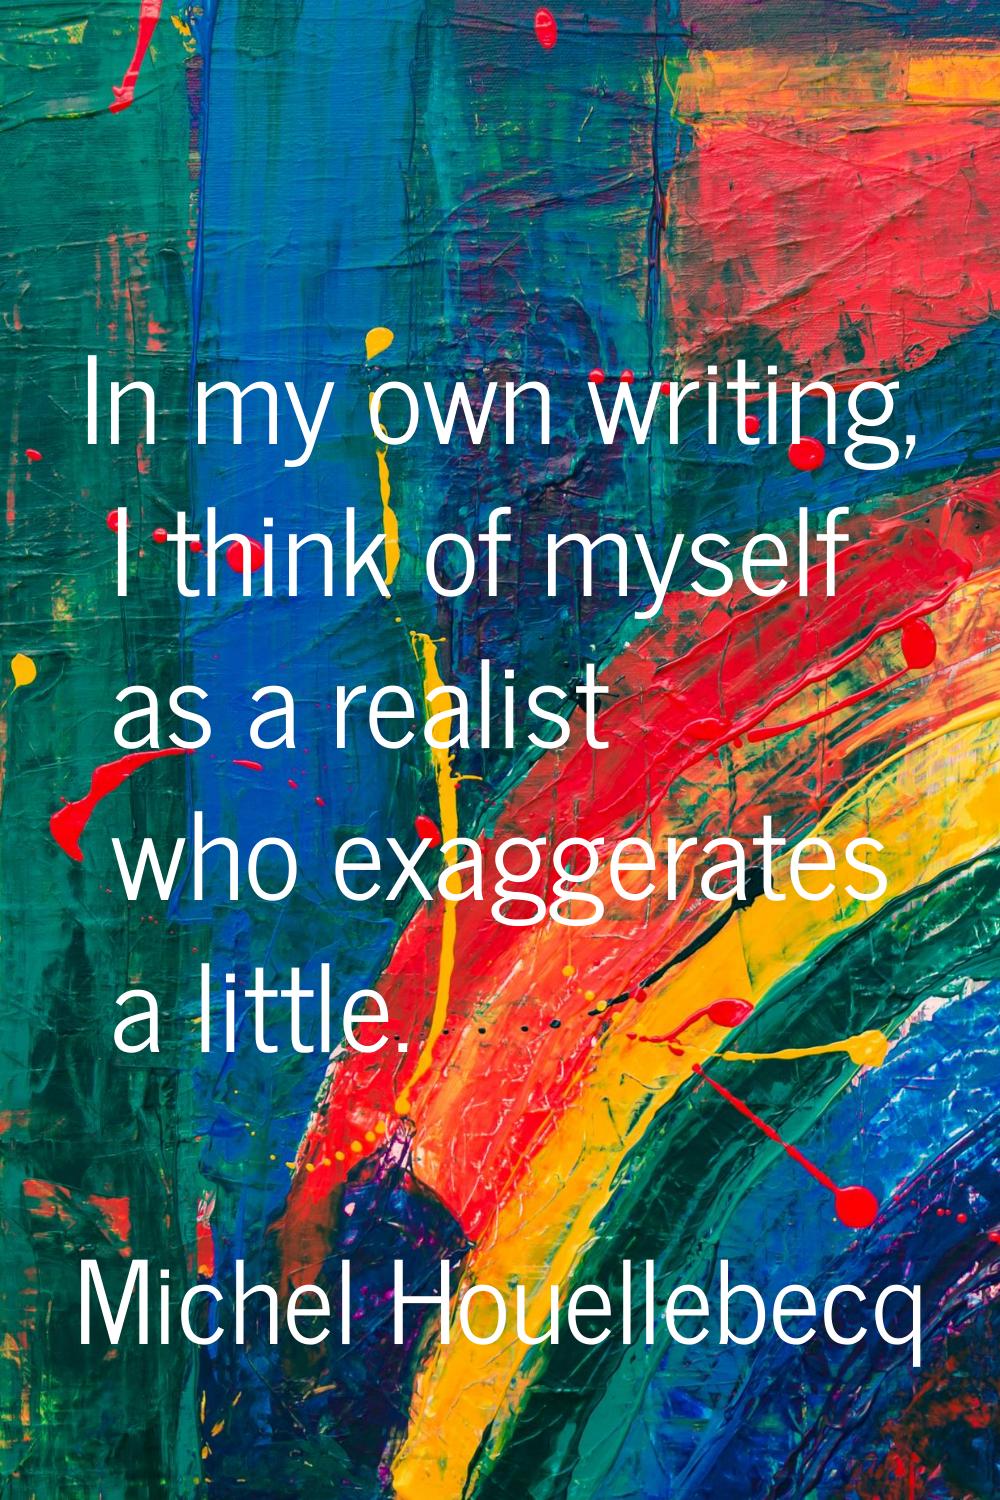 In my own writing, I think of myself as a realist who exaggerates a little.